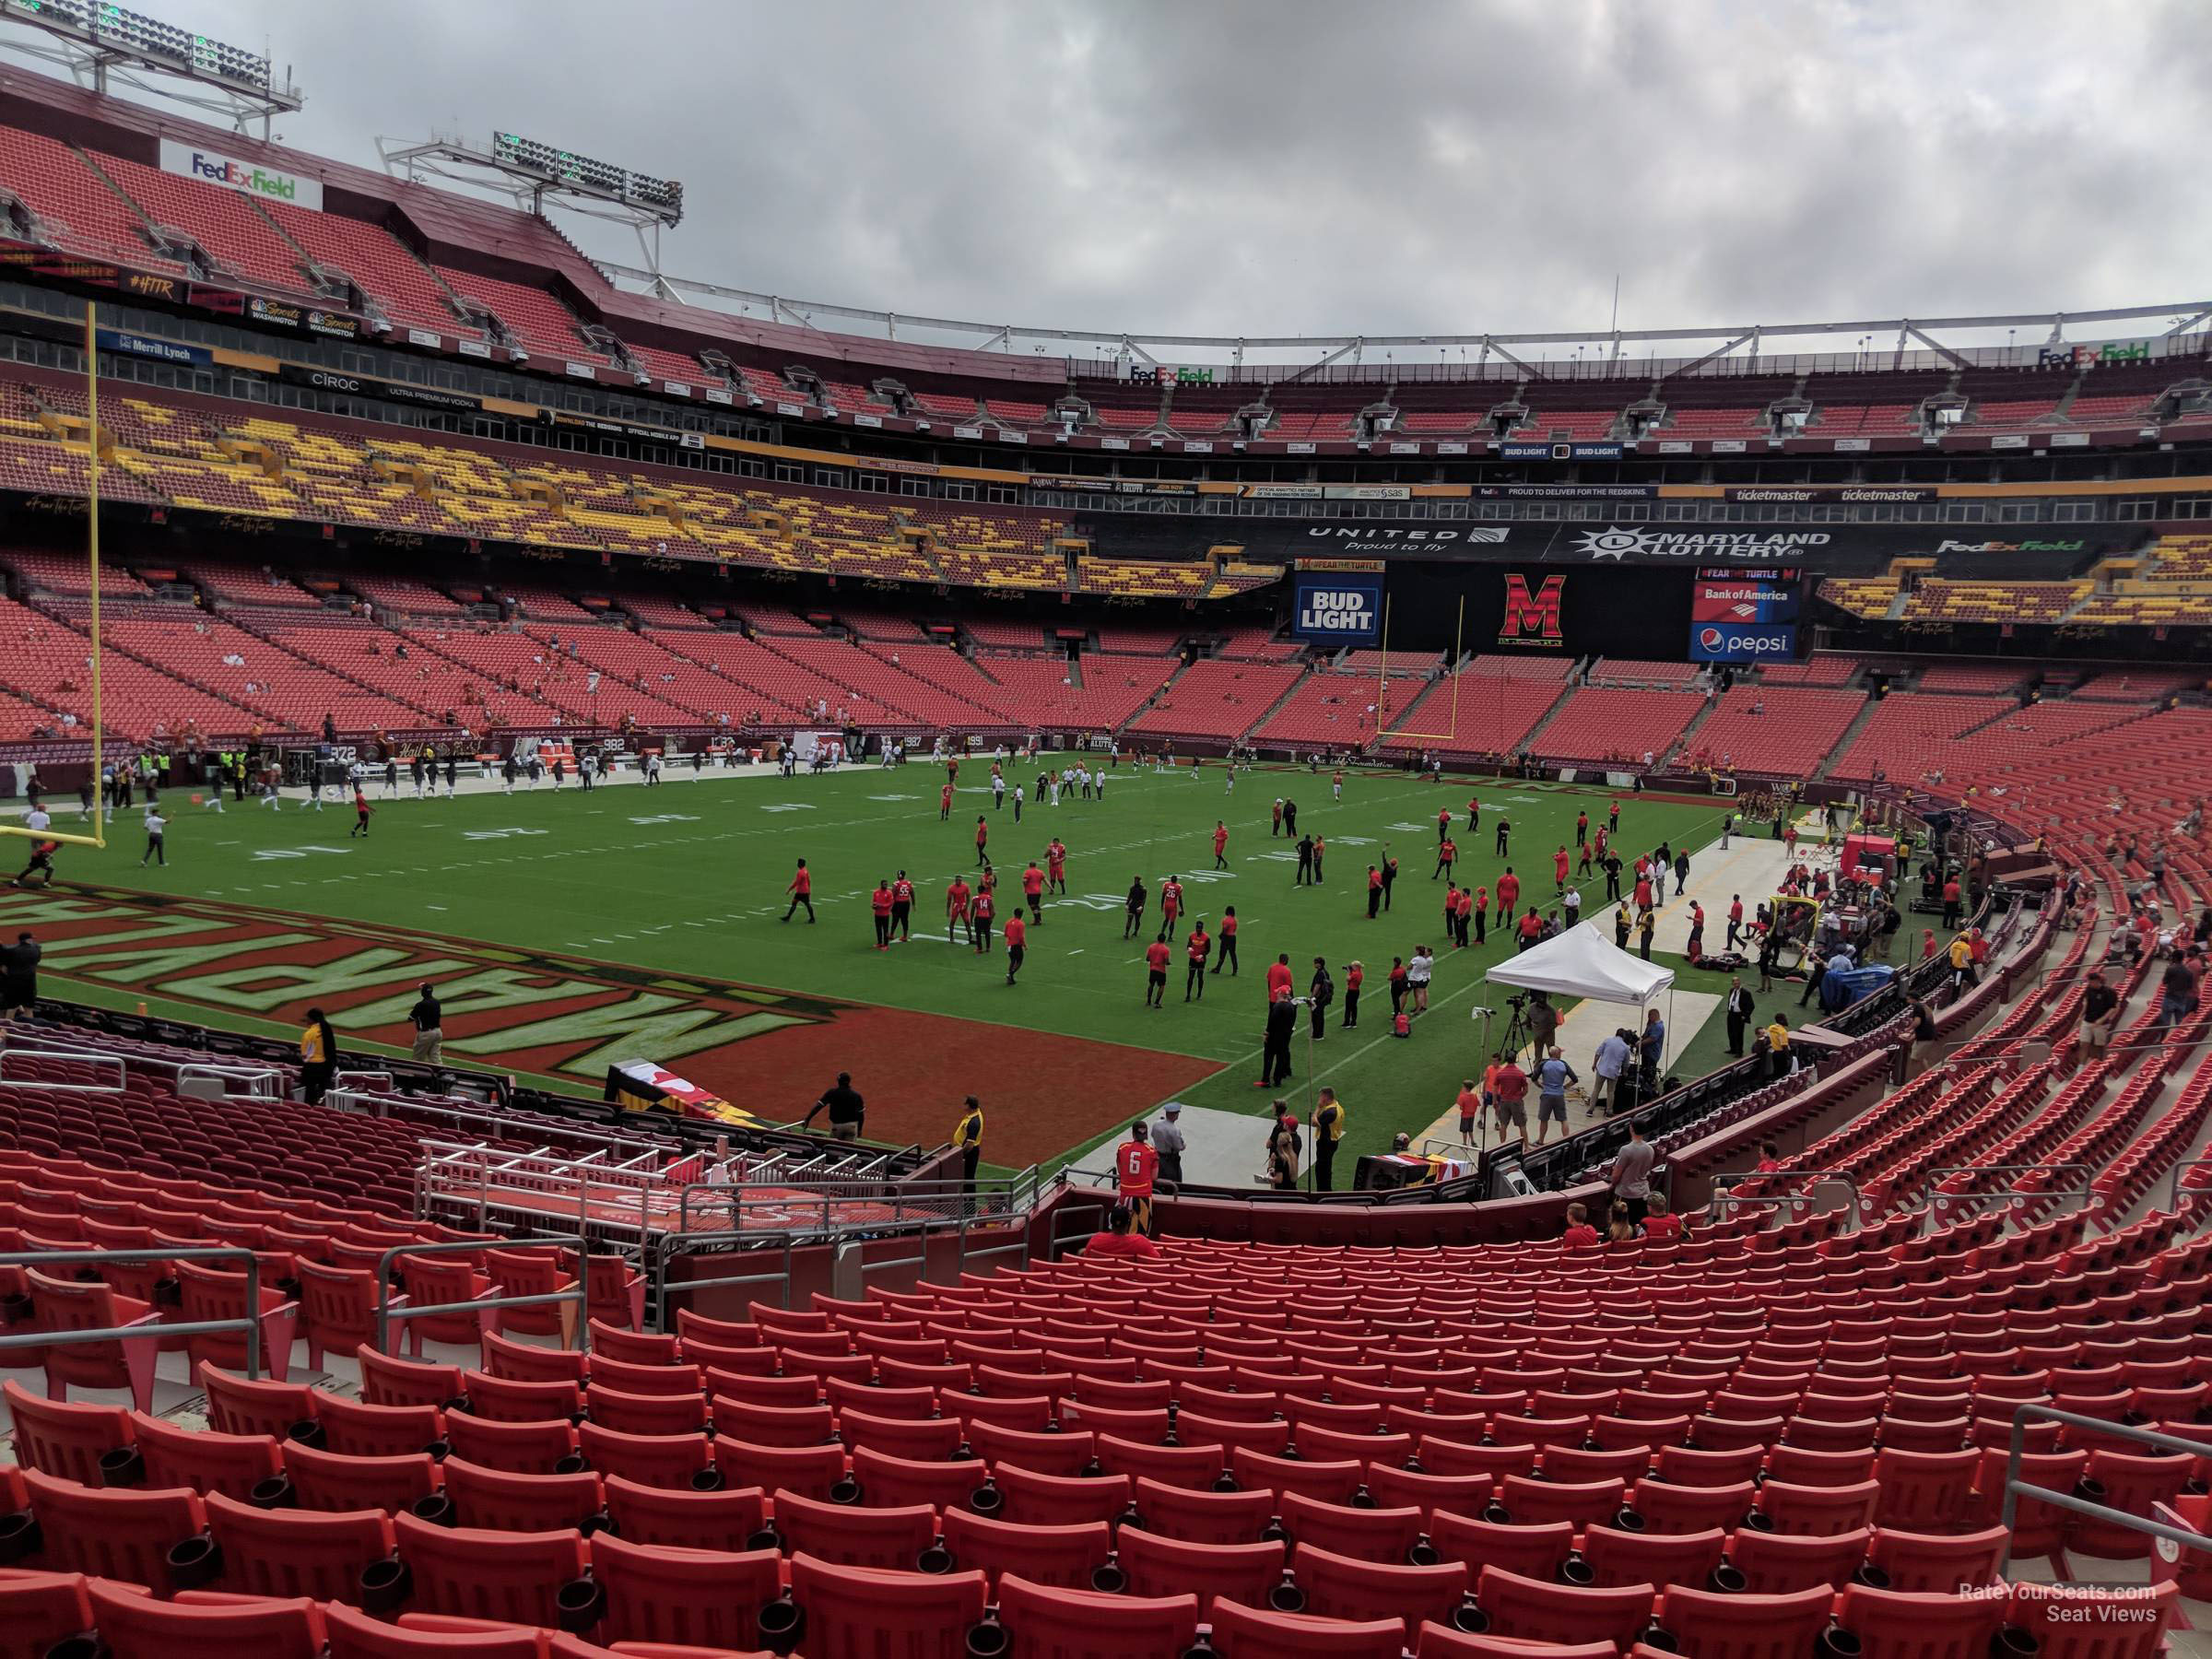 section 108, row 25 seat view  - fedexfield